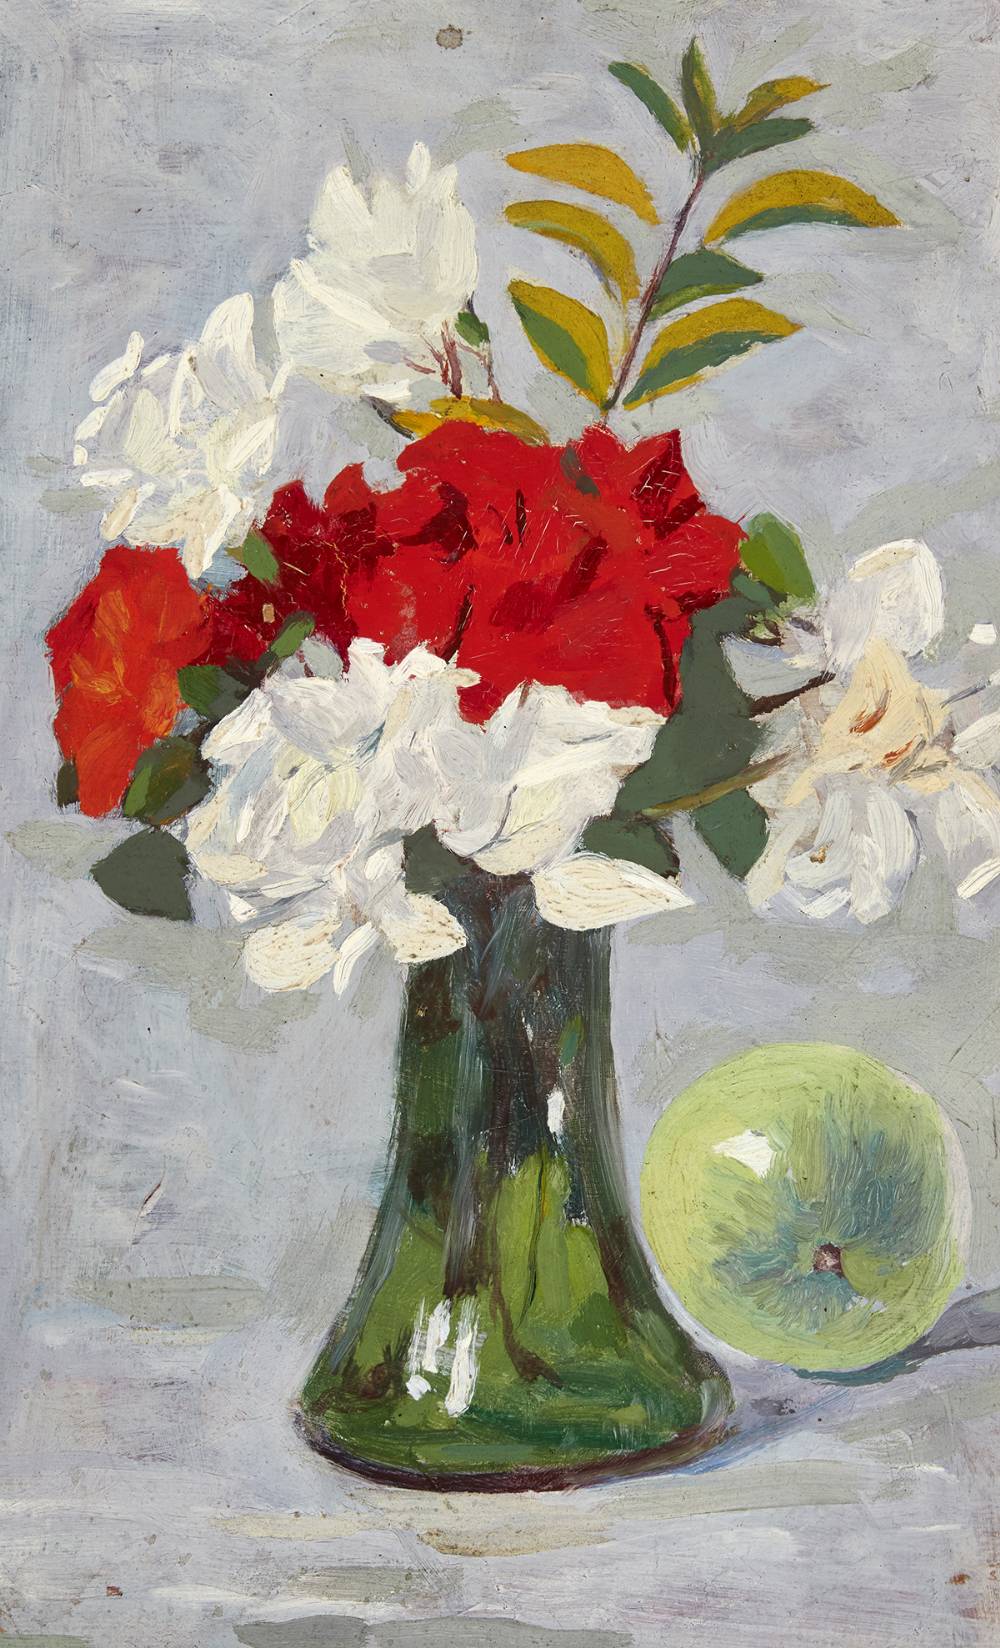 ORANGE AND WHITE FLOWERS IN A GREEN, BELL-BOTTOMED VASE by Michael Healy (1873-1941) (1873-1941) at Whyte's Auctions